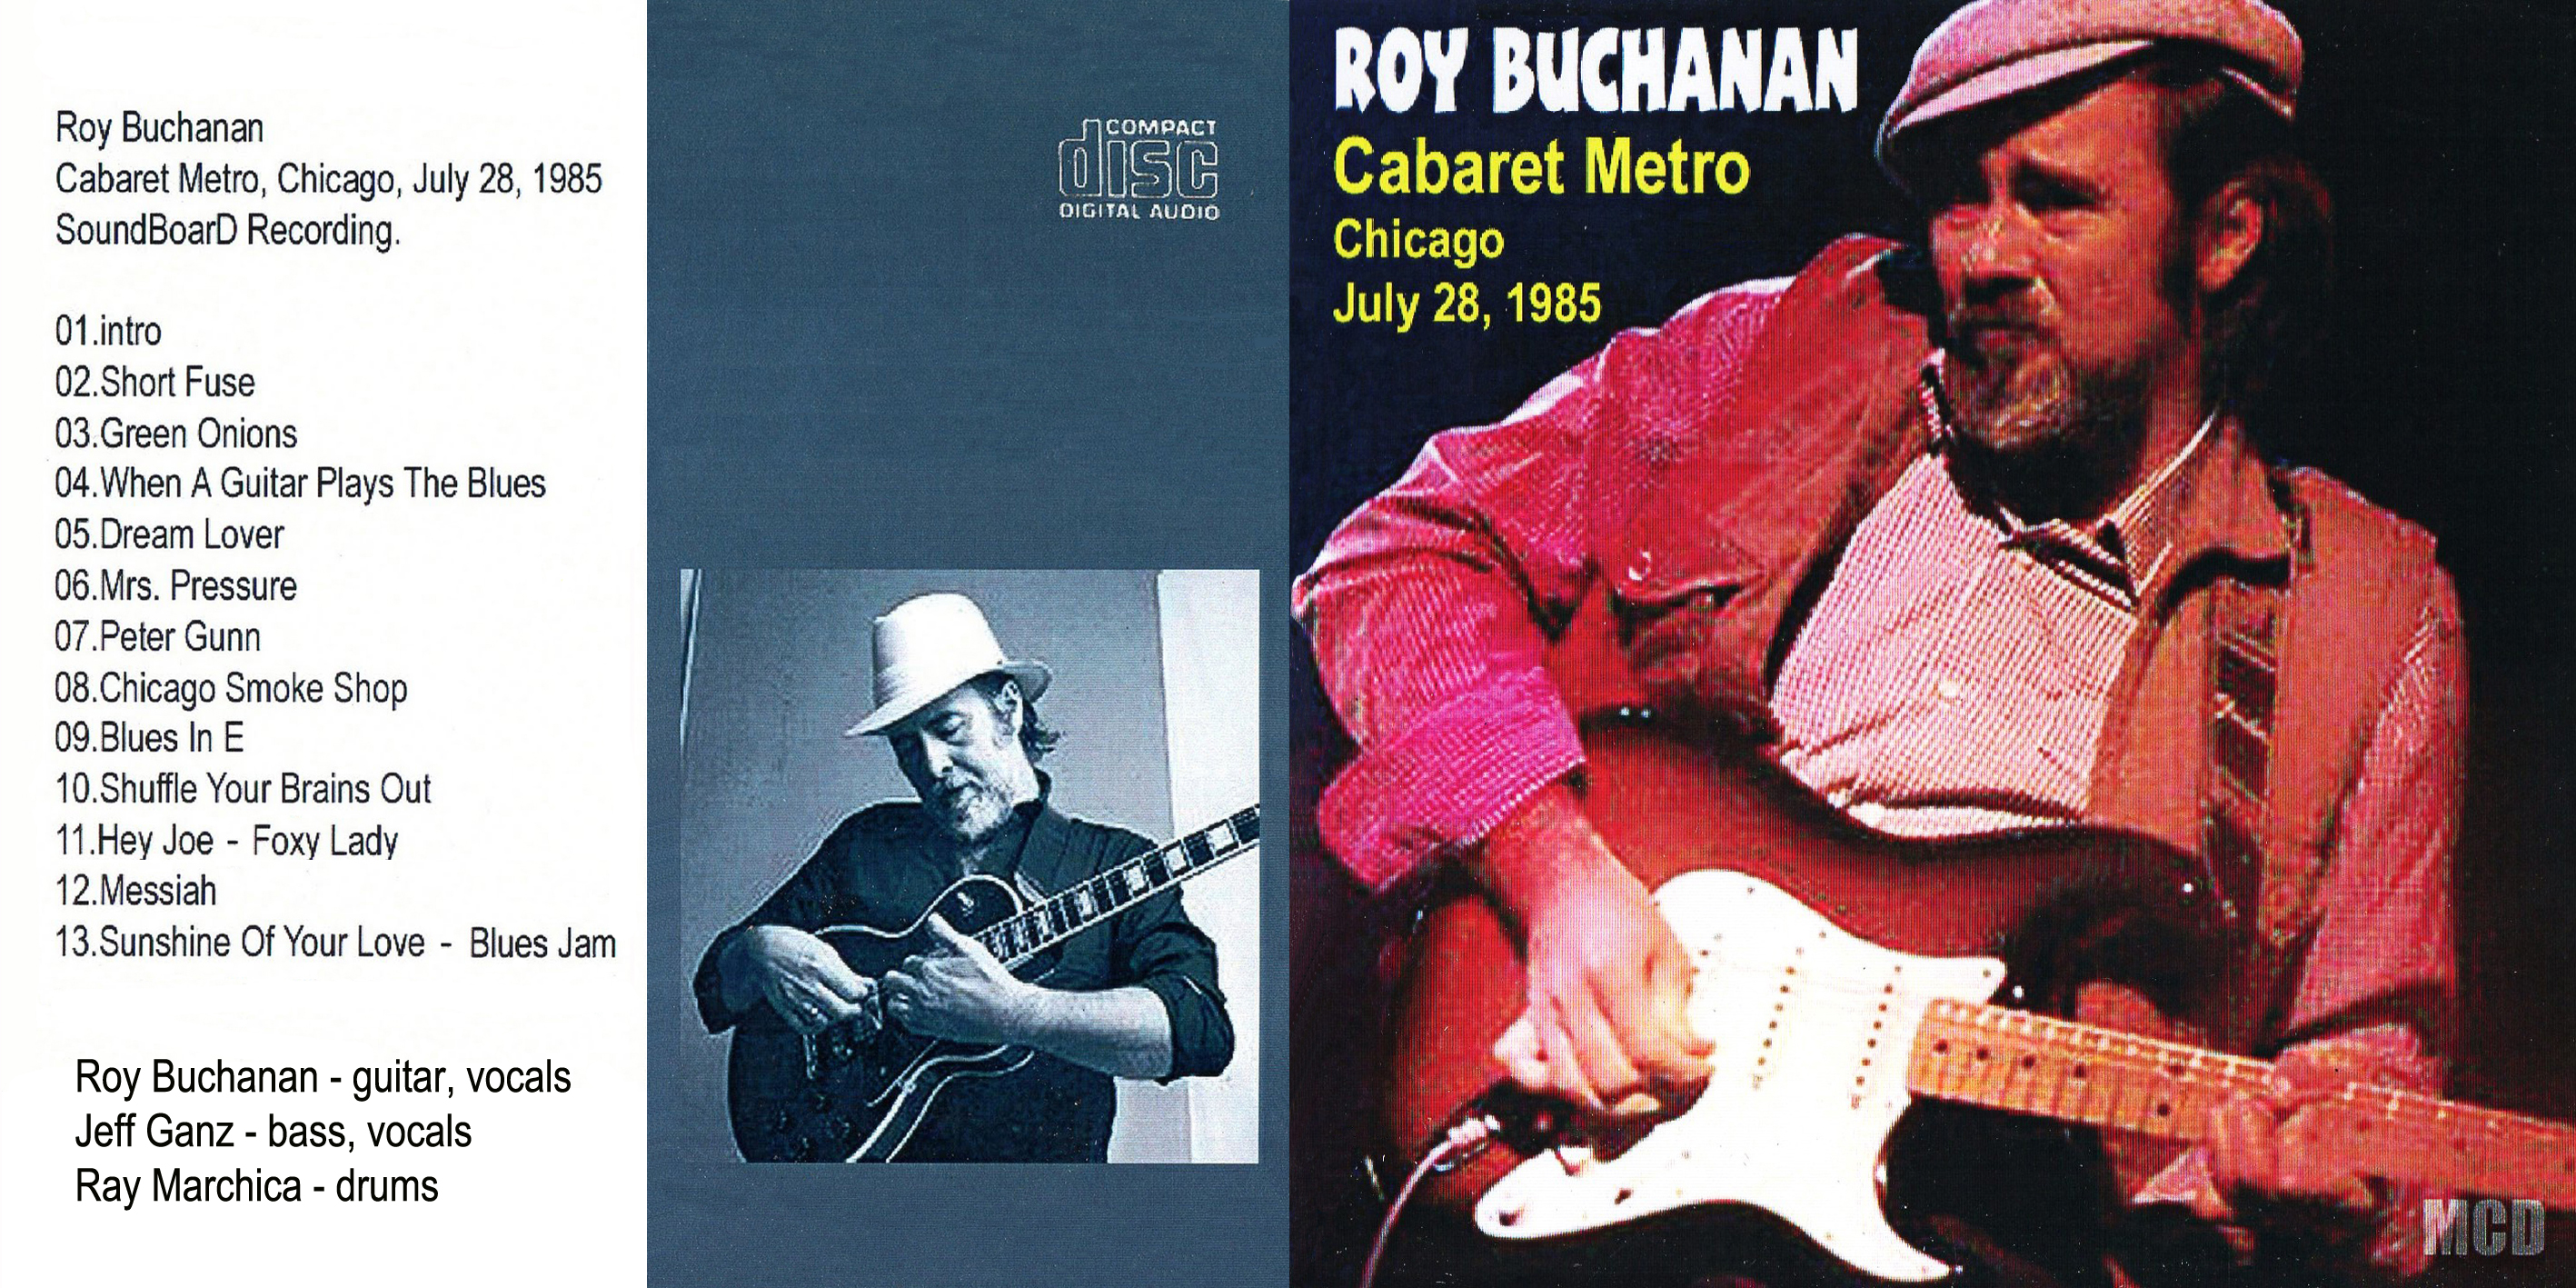 roy buchanan cdr mcd cabaret metro chicago july 28, 1985 cover out